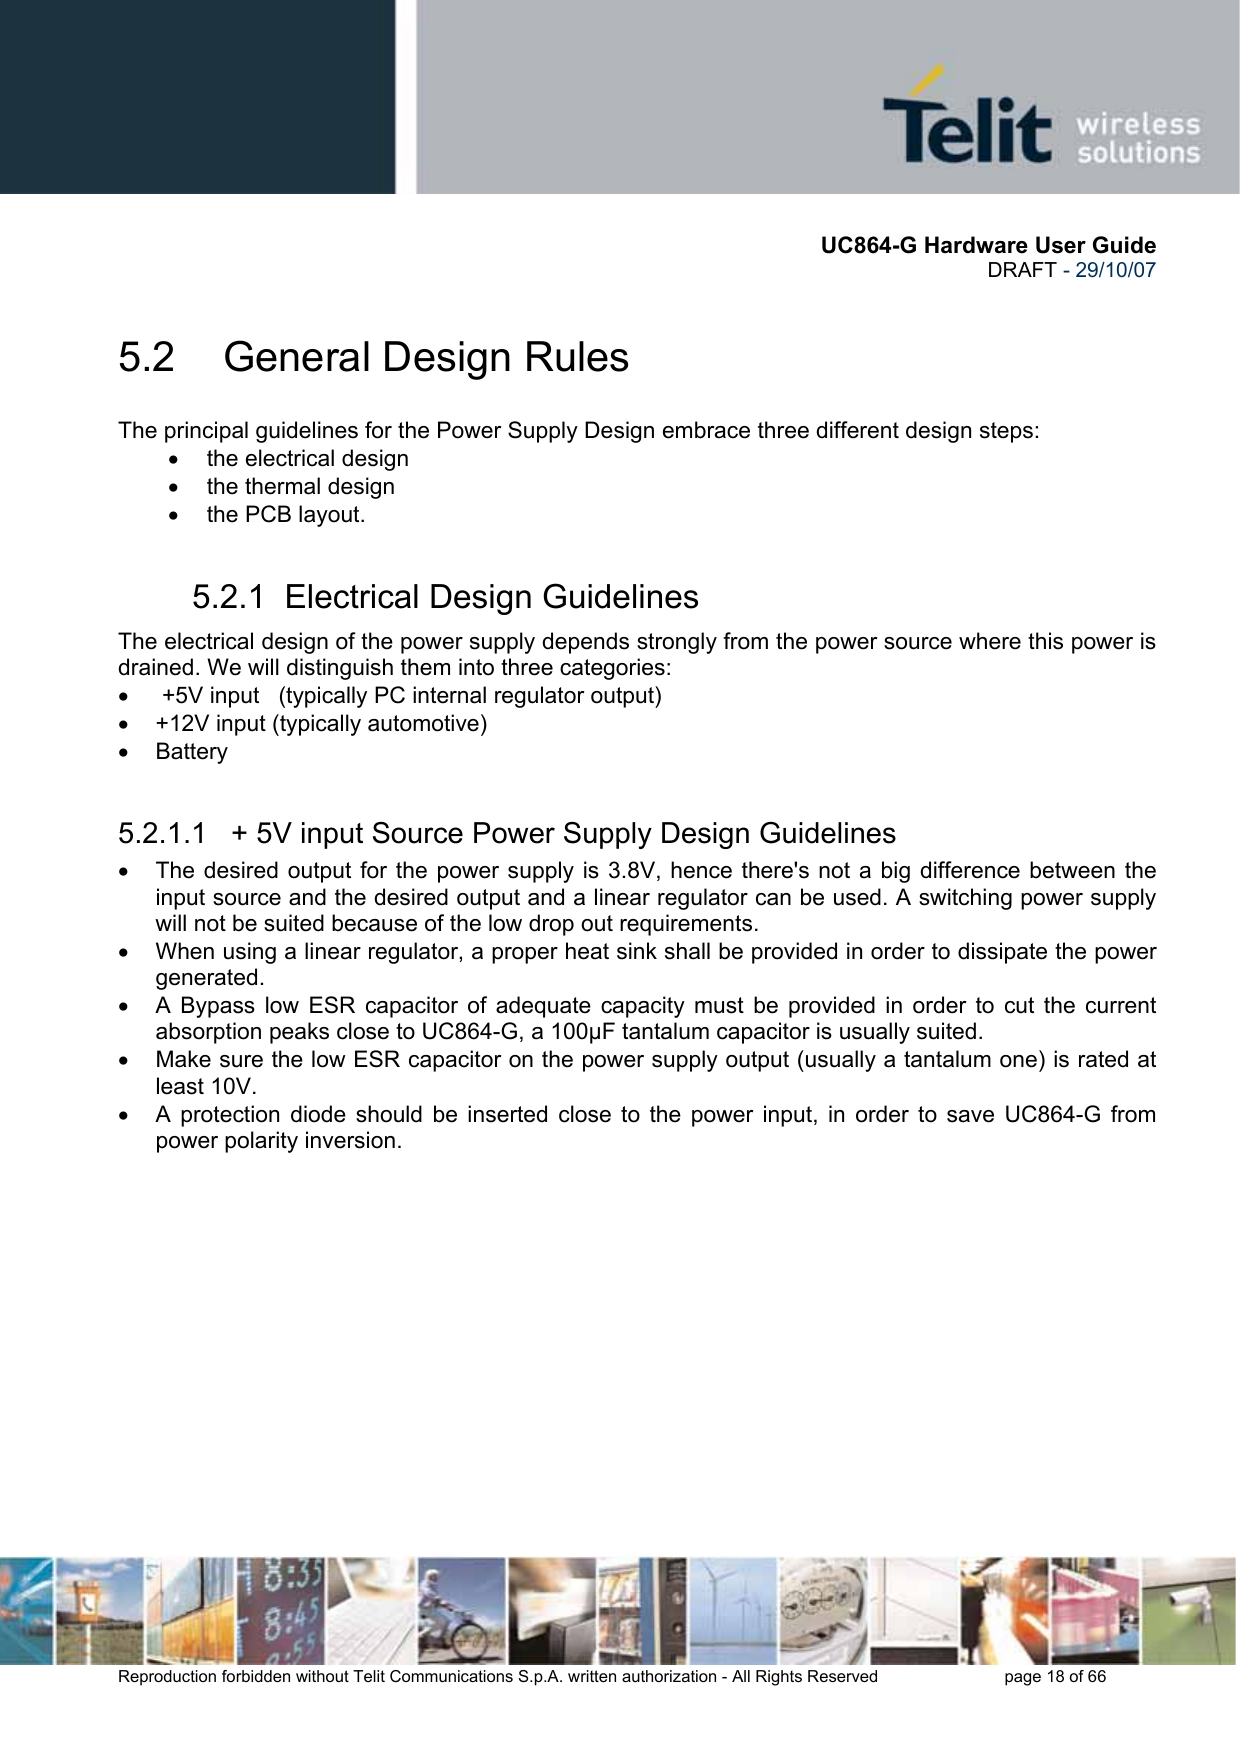       UC864-G Hardware User Guide  DRAFT - 29/10/07      Reproduction forbidden without Telit Communications S.p.A. written authorization - All Rights Reserved    page 18 of 66  5.2  General Design Rules The principal guidelines for the Power Supply Design embrace three different design steps: •  the electrical design •  the thermal design •  the PCB layout. 5.2.1  Electrical Design Guidelines The electrical design of the power supply depends strongly from the power source where this power is drained. We will distinguish them into three categories: •   +5V input   (typically PC internal regulator output) •  +12V input (typically automotive) • Battery  5.2.1.1   + 5V input Source Power Supply Design Guidelines •  The desired output for the power supply is 3.8V, hence there&apos;s not a big difference between the input source and the desired output and a linear regulator can be used. A switching power supply will not be suited because of the low drop out requirements. •  When using a linear regulator, a proper heat sink shall be provided in order to dissipate the power generated. •  A Bypass low ESR capacitor of adequate capacity must be provided in order to cut the current absorption peaks close to UC864-G, a 100µF tantalum capacitor is usually suited. •  Make sure the low ESR capacitor on the power supply output (usually a tantalum one) is rated at least 10V. •  A protection diode should be inserted close to the power input, in order to save UC864-G from power polarity inversion. 